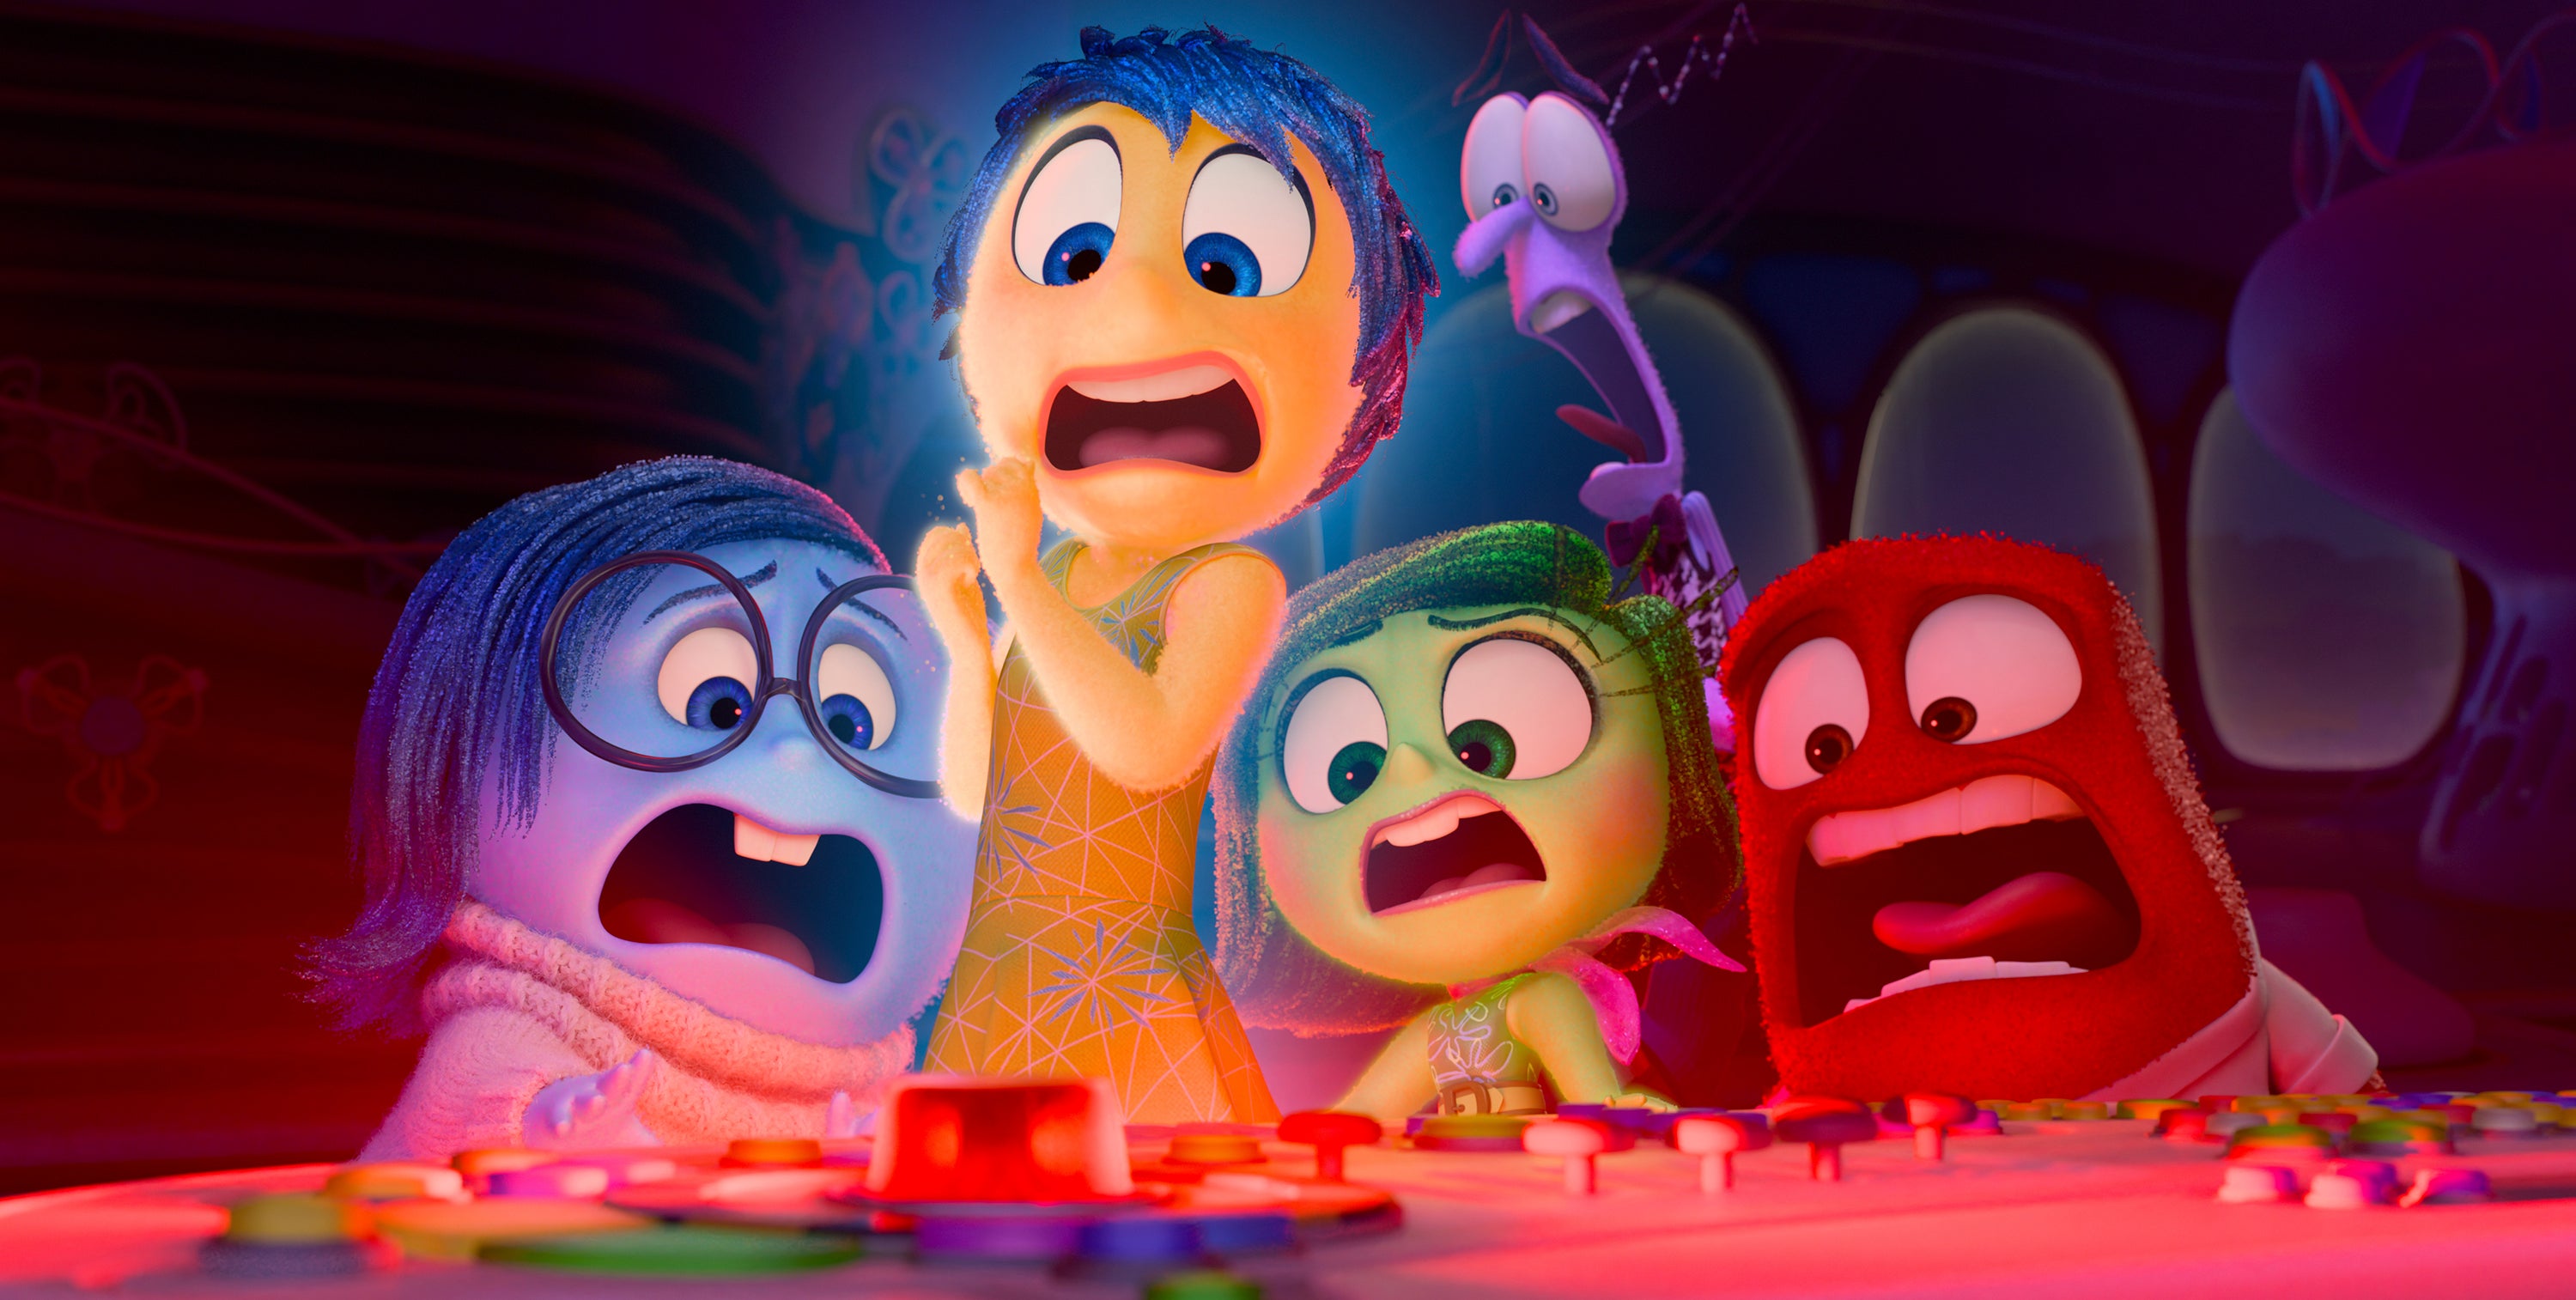 ‘Inside Out 2’ grossed $155m during its opening weekend